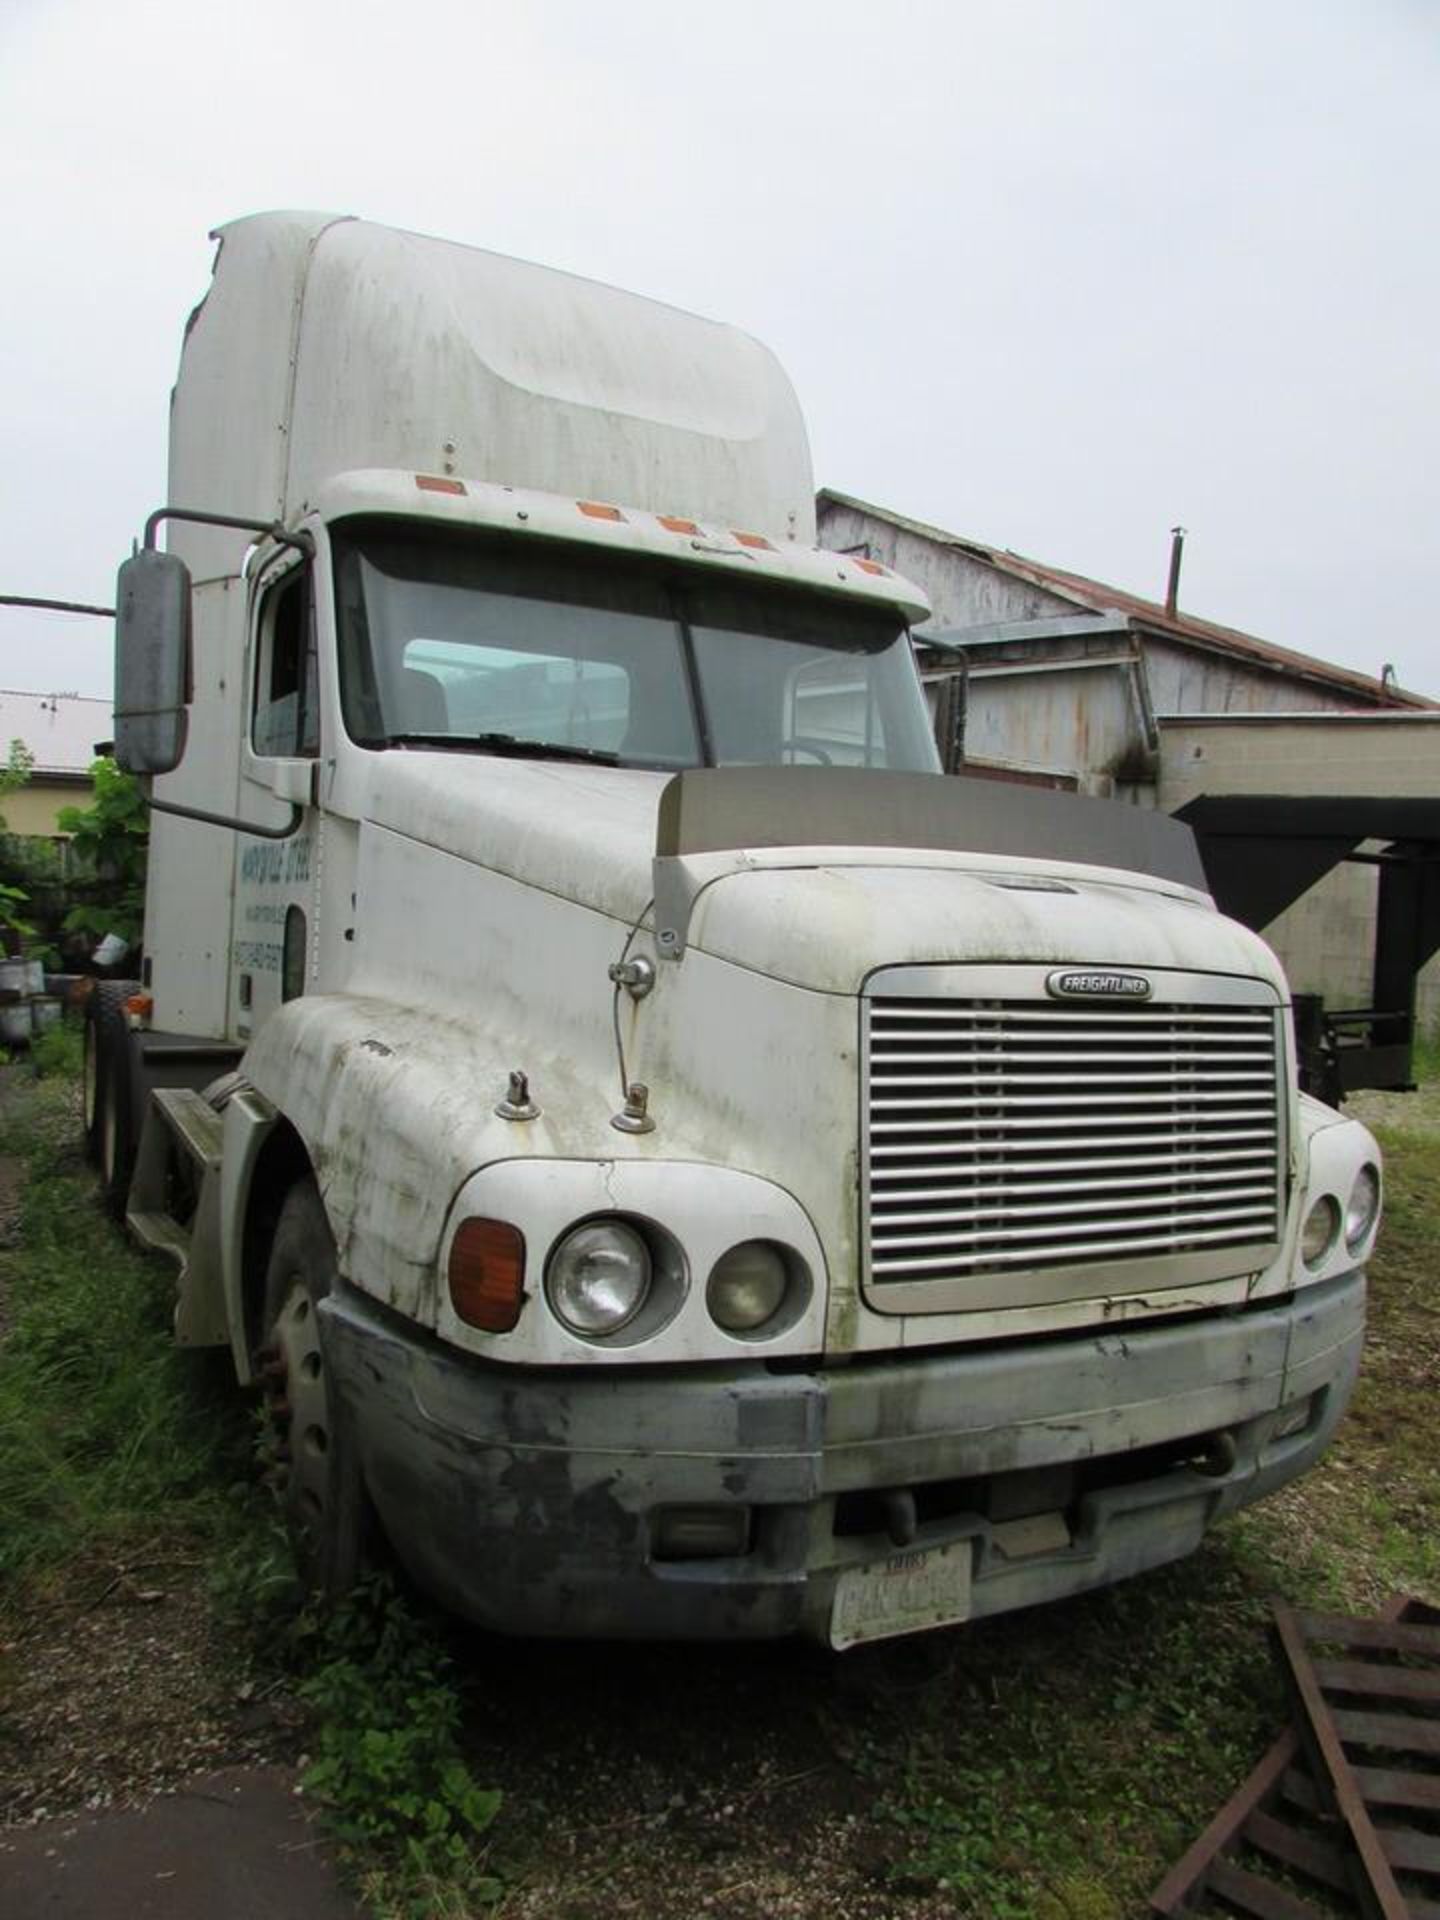 2002 Freightliner Century Class Day Cab Truck Tractor, 52,000 GVWR, Eaton Fuller 10-Speed Manual